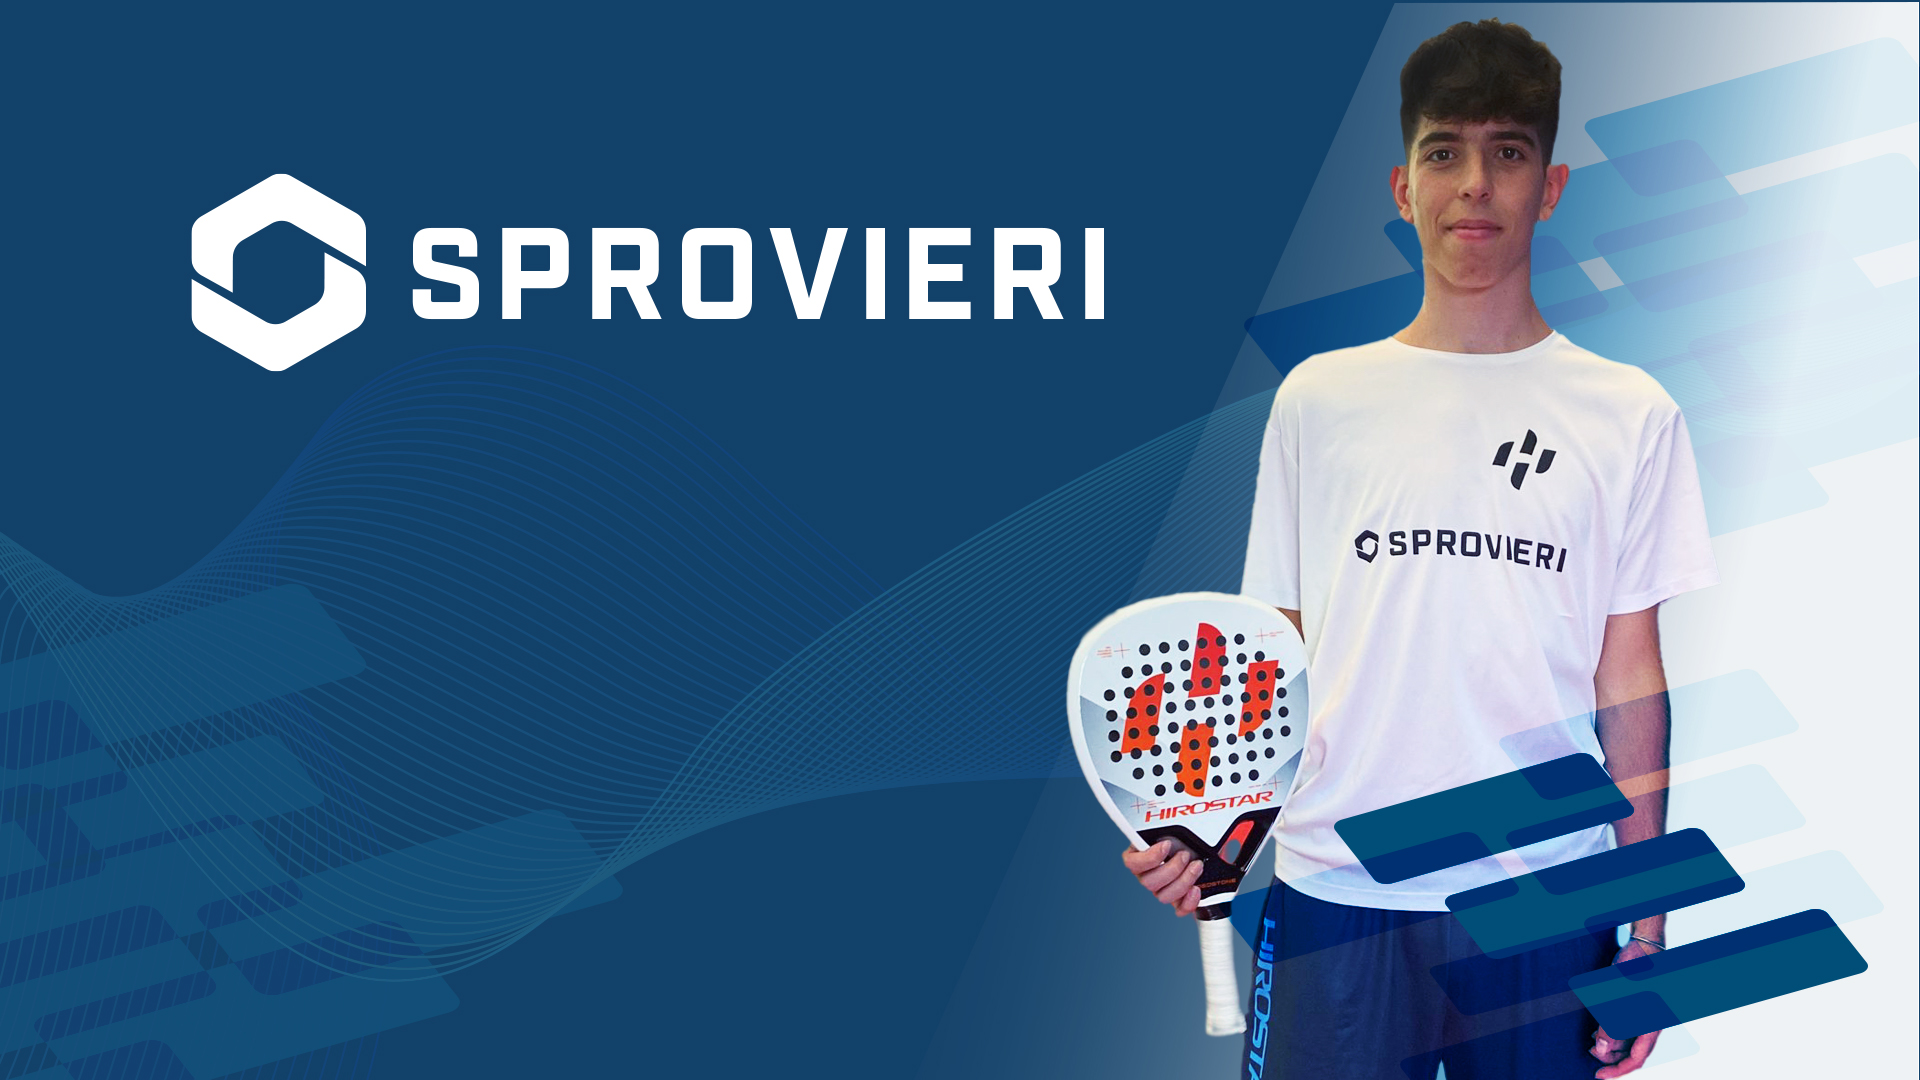 Article imageSprovieri S.r.l. is the official sponsor of padel player Giuseppe Fino